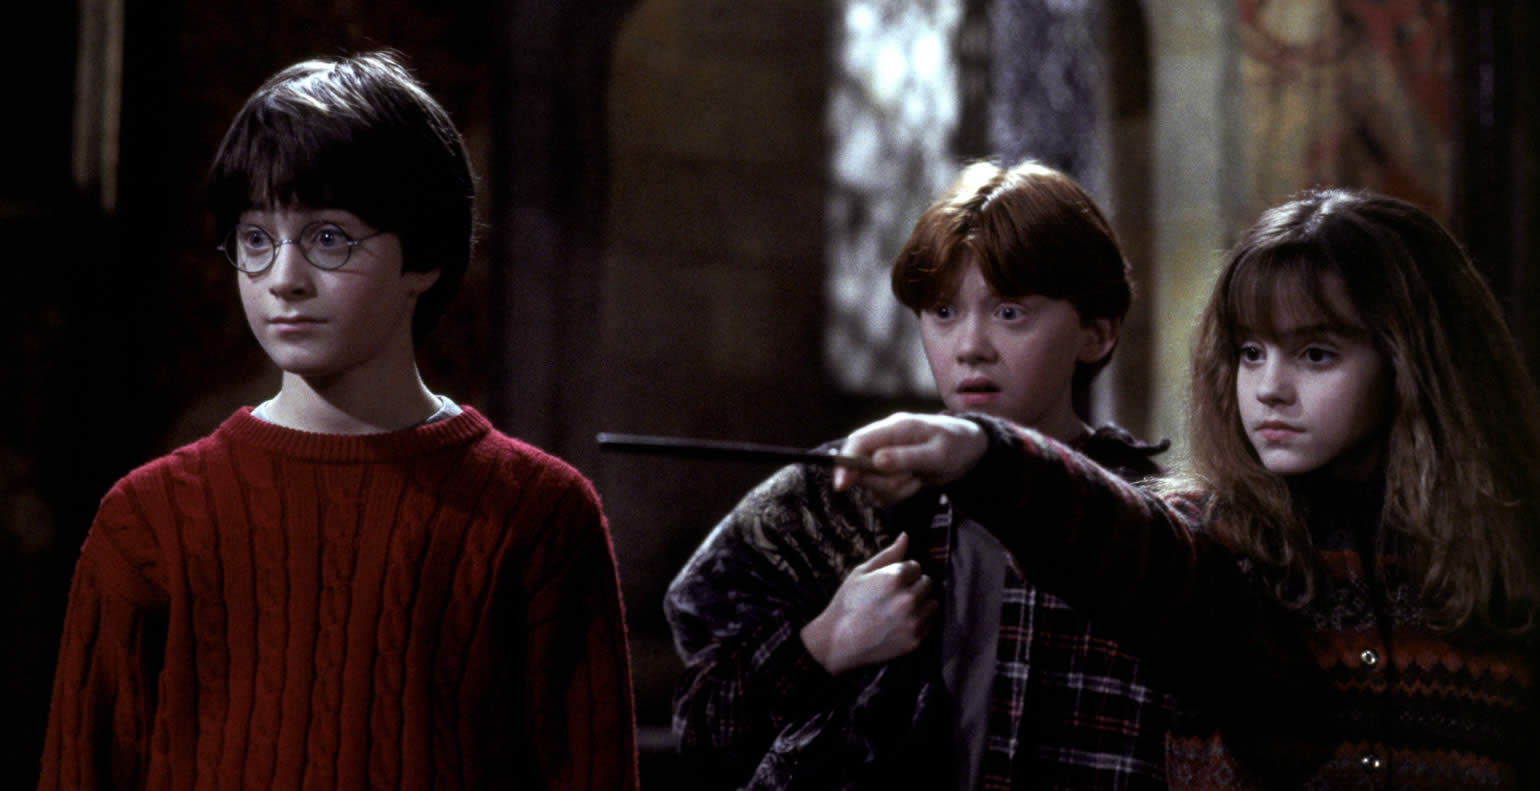 The beginning of Act 2 in Harry Potter is when he goes to school for the first time.